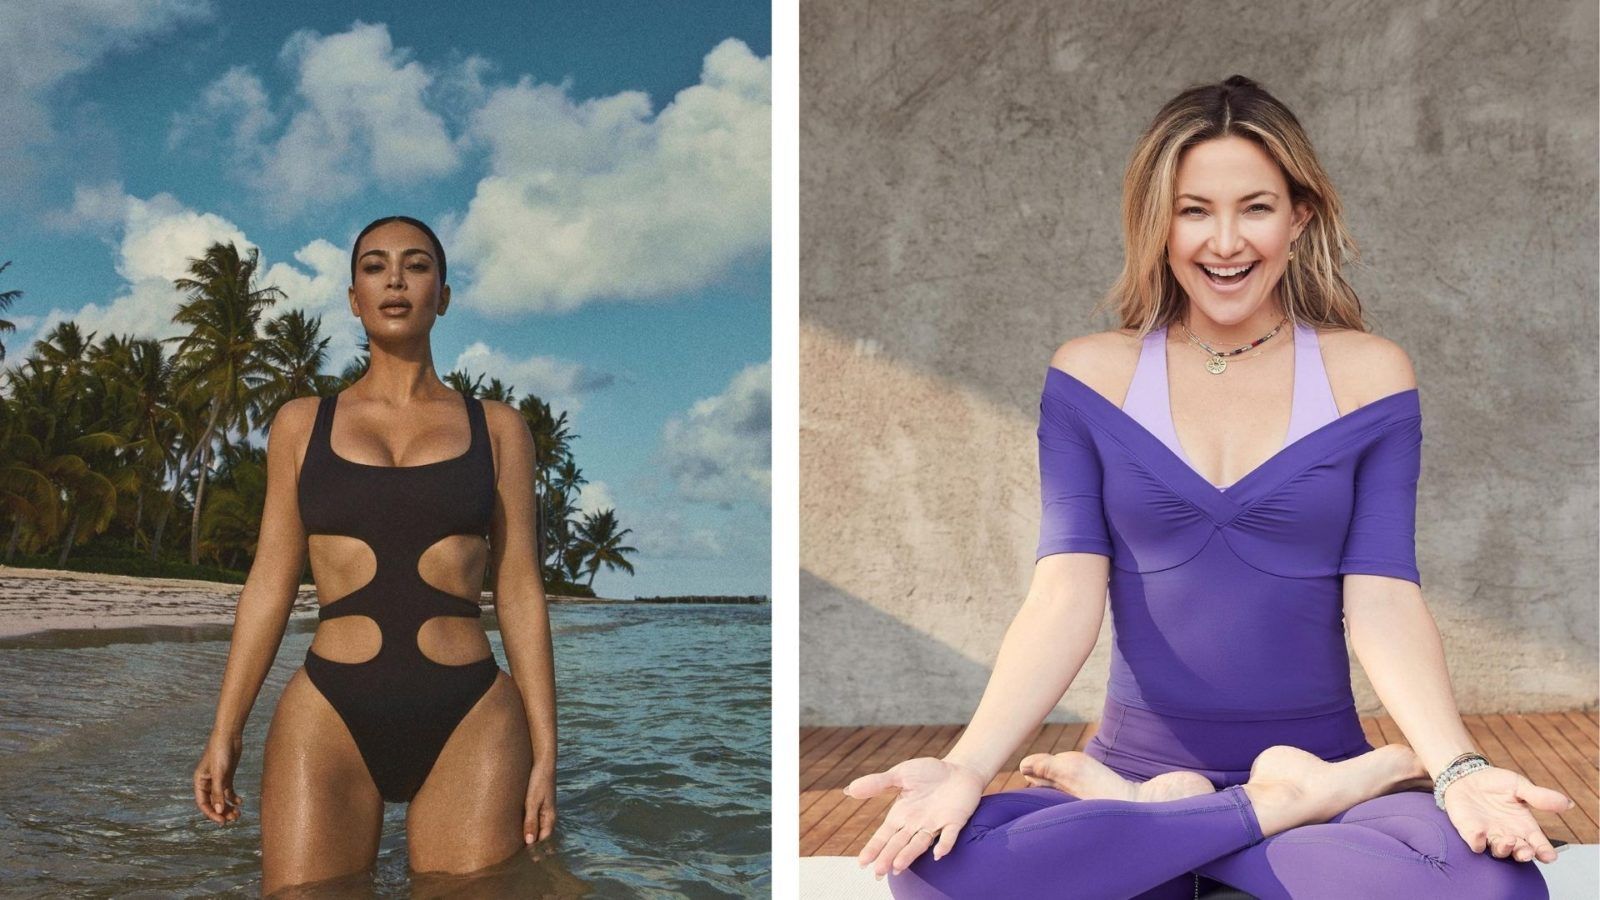 From Kim K to Lizzo: 6 celebrities who have their own shapewear and activewear lines